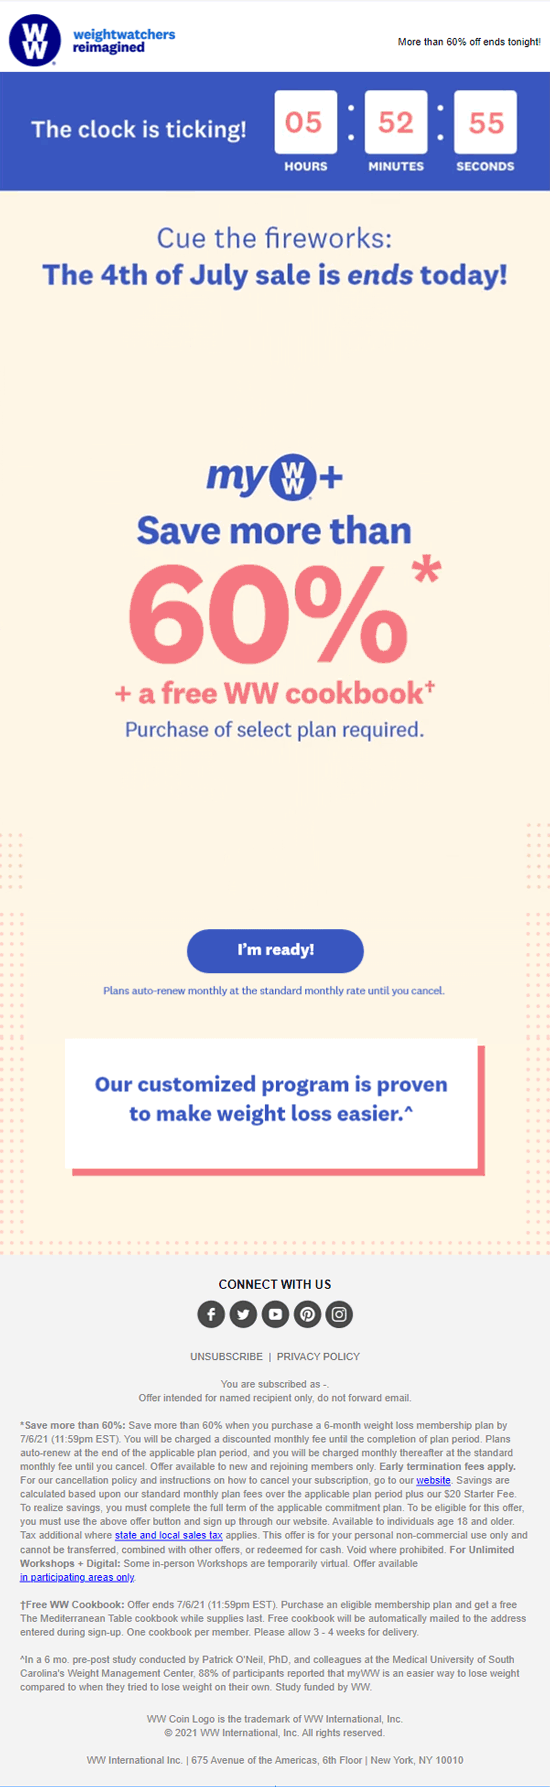 Weight Watchers- Email Inspiration